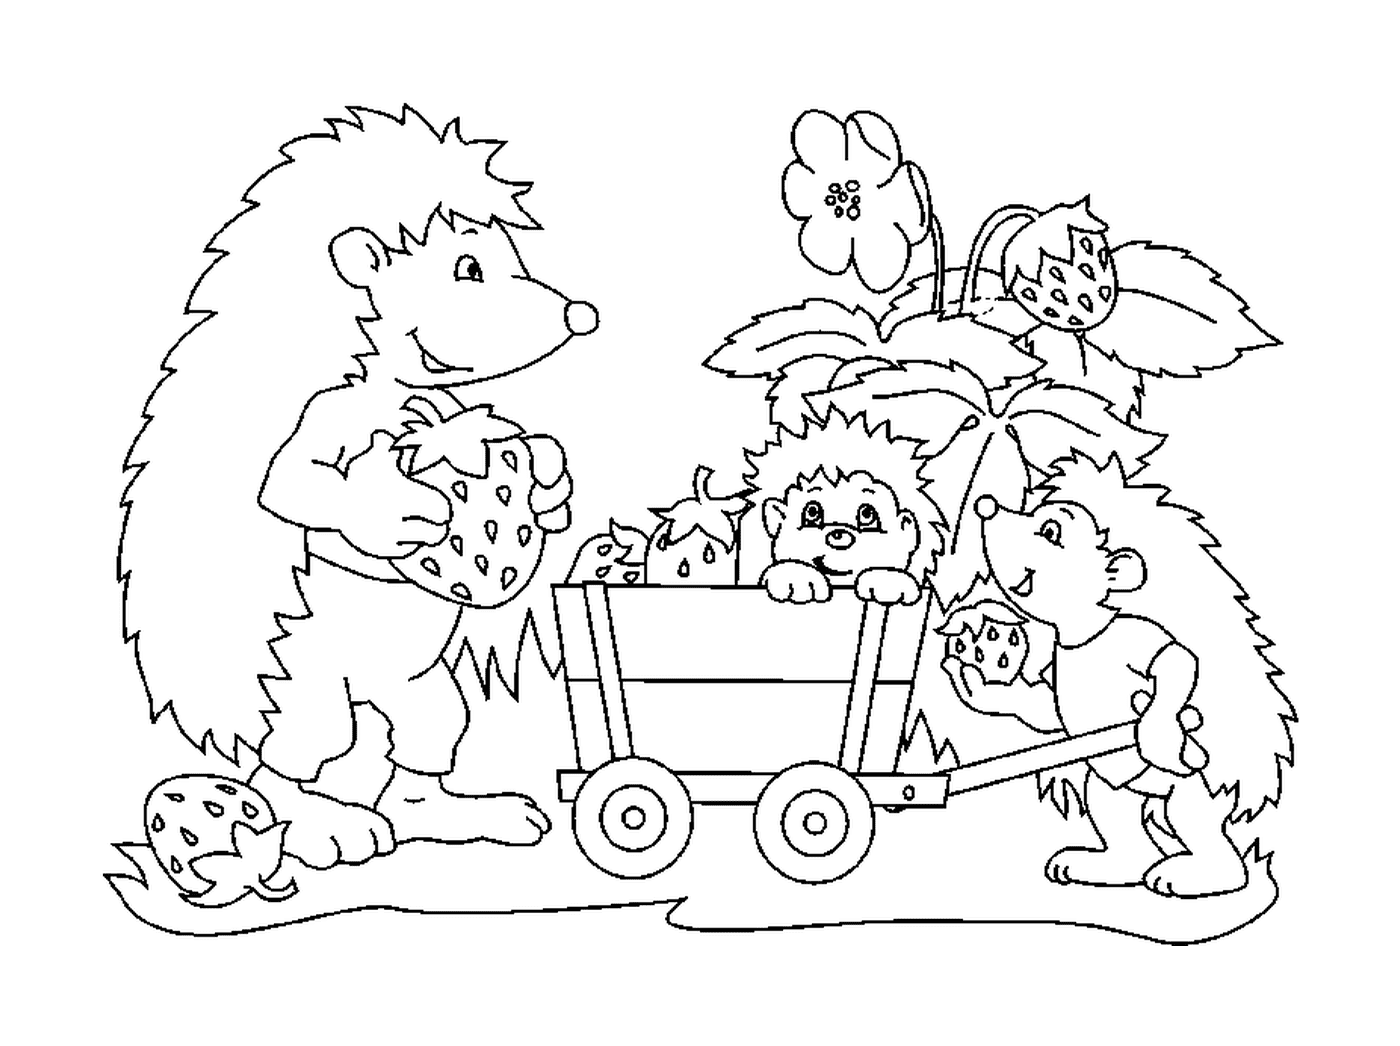  The hedgehogs pick up the strawberries 